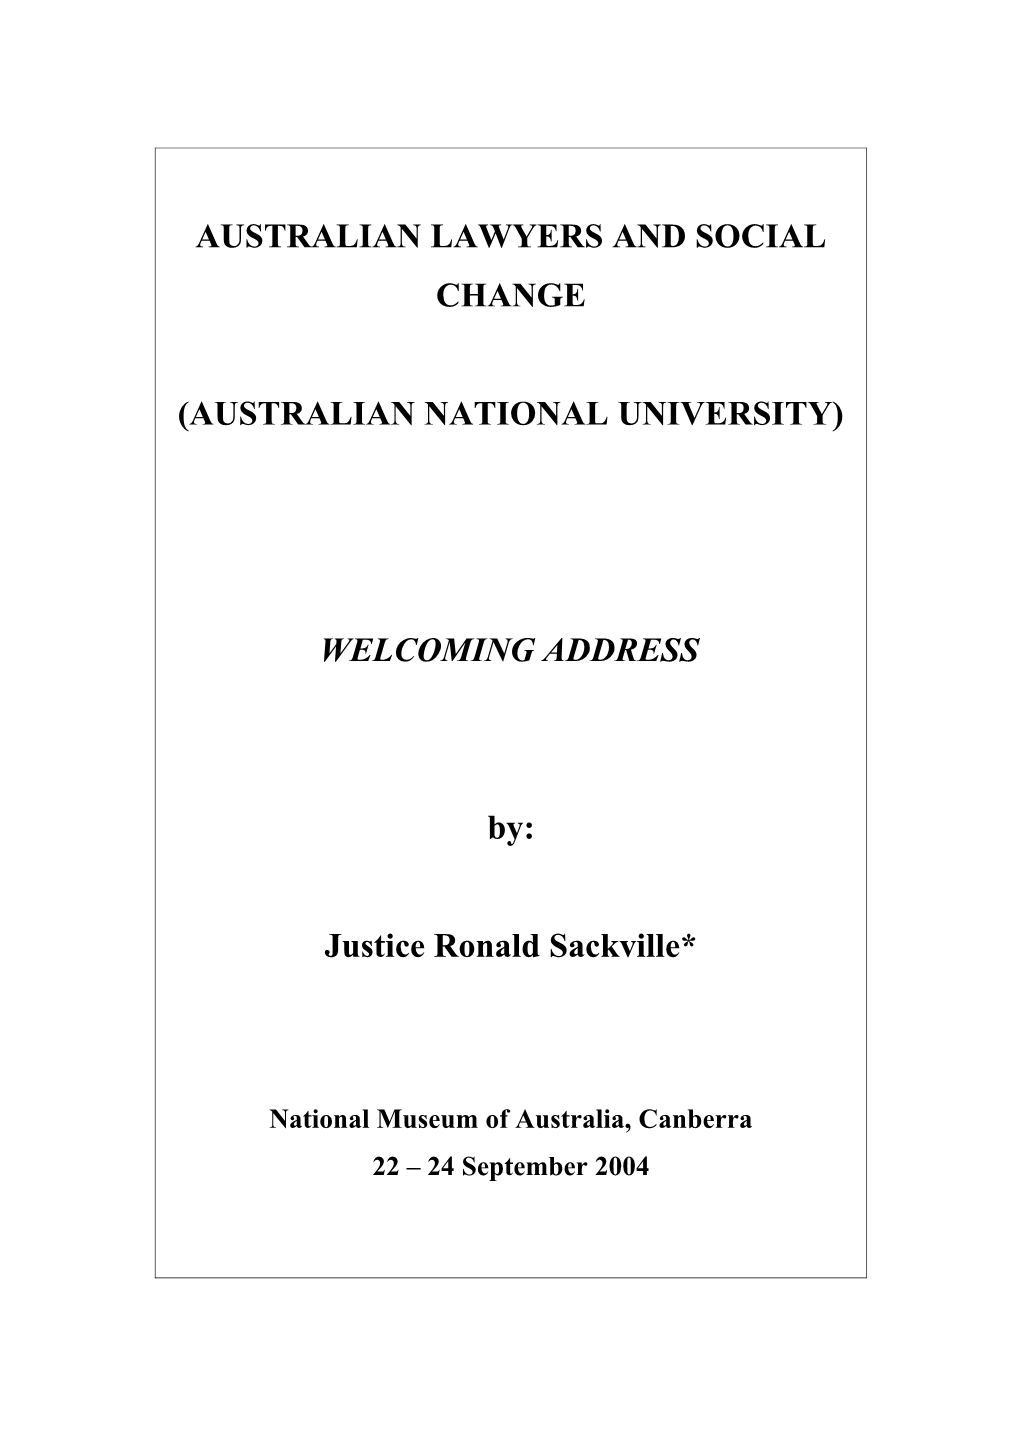 Draft of Welcome to Lawyers and Social Change Conference